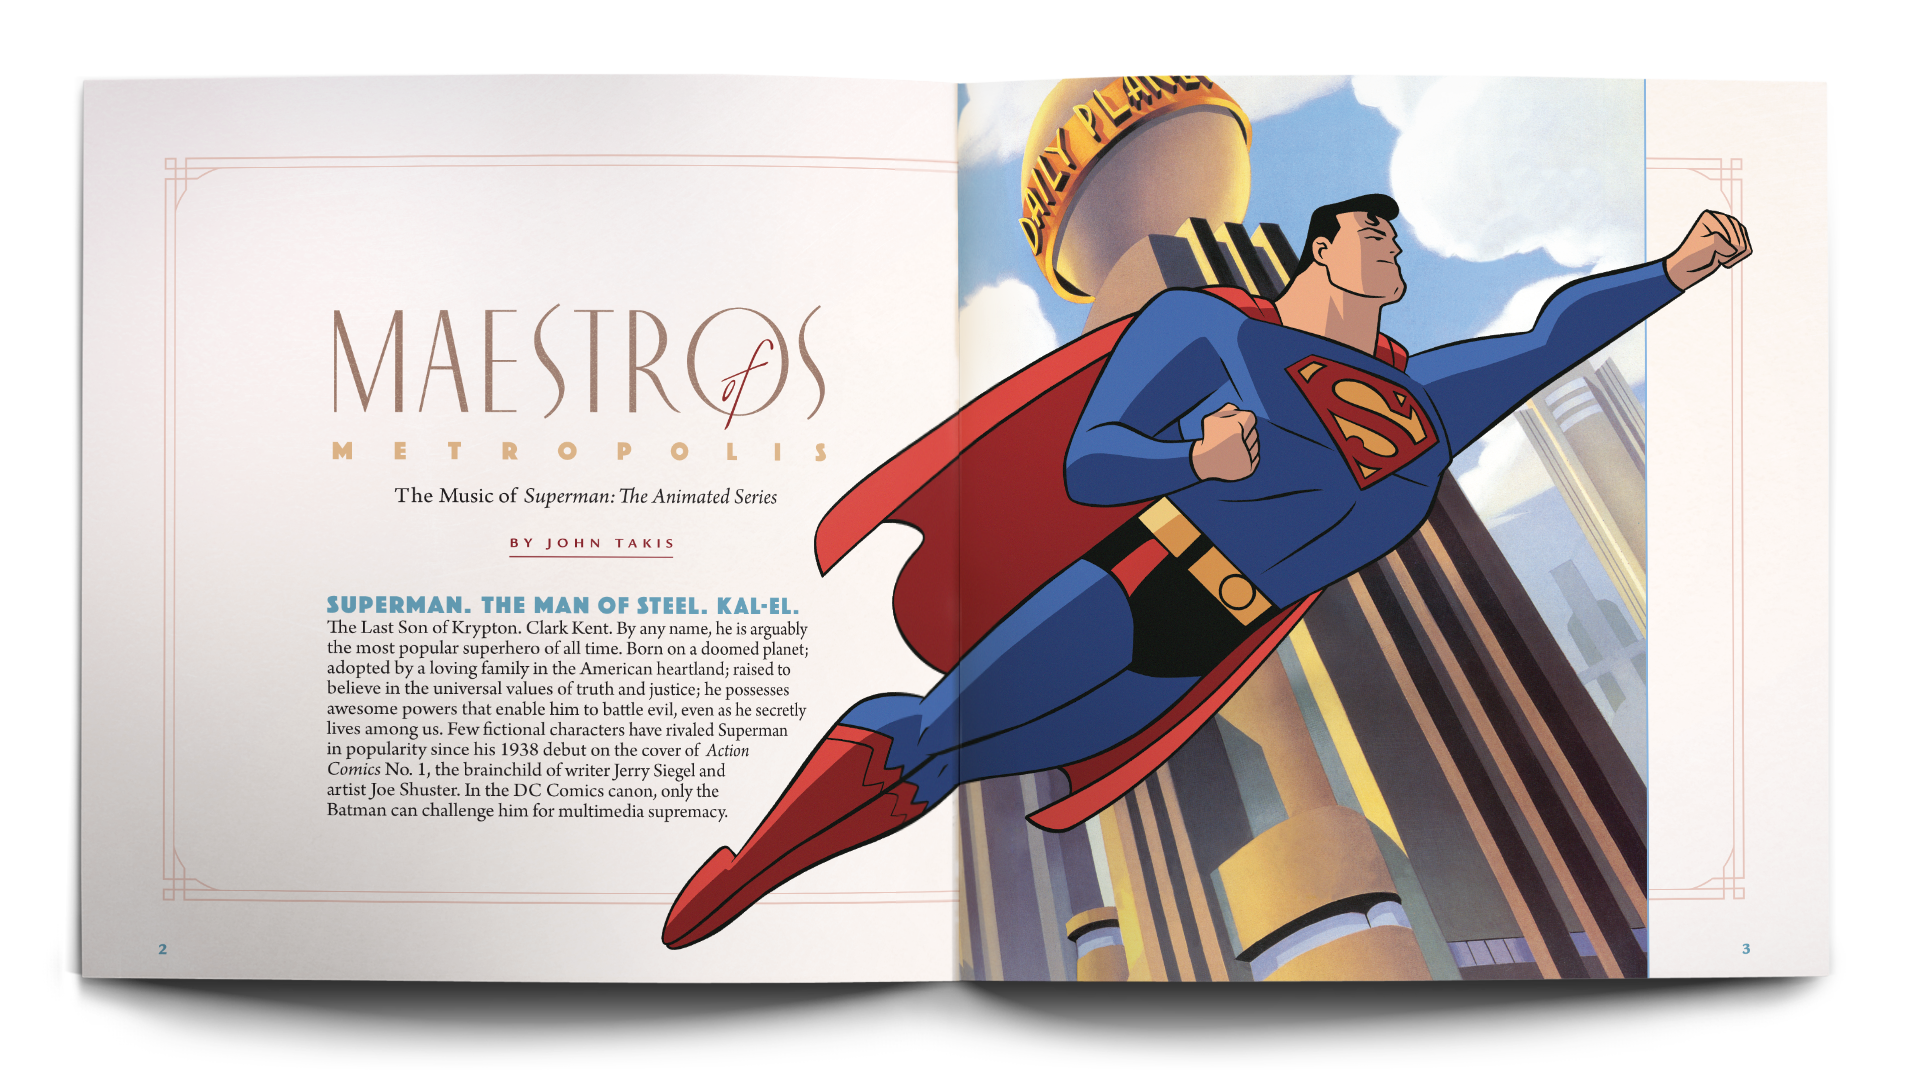 Superman: The Animated Series on Behance